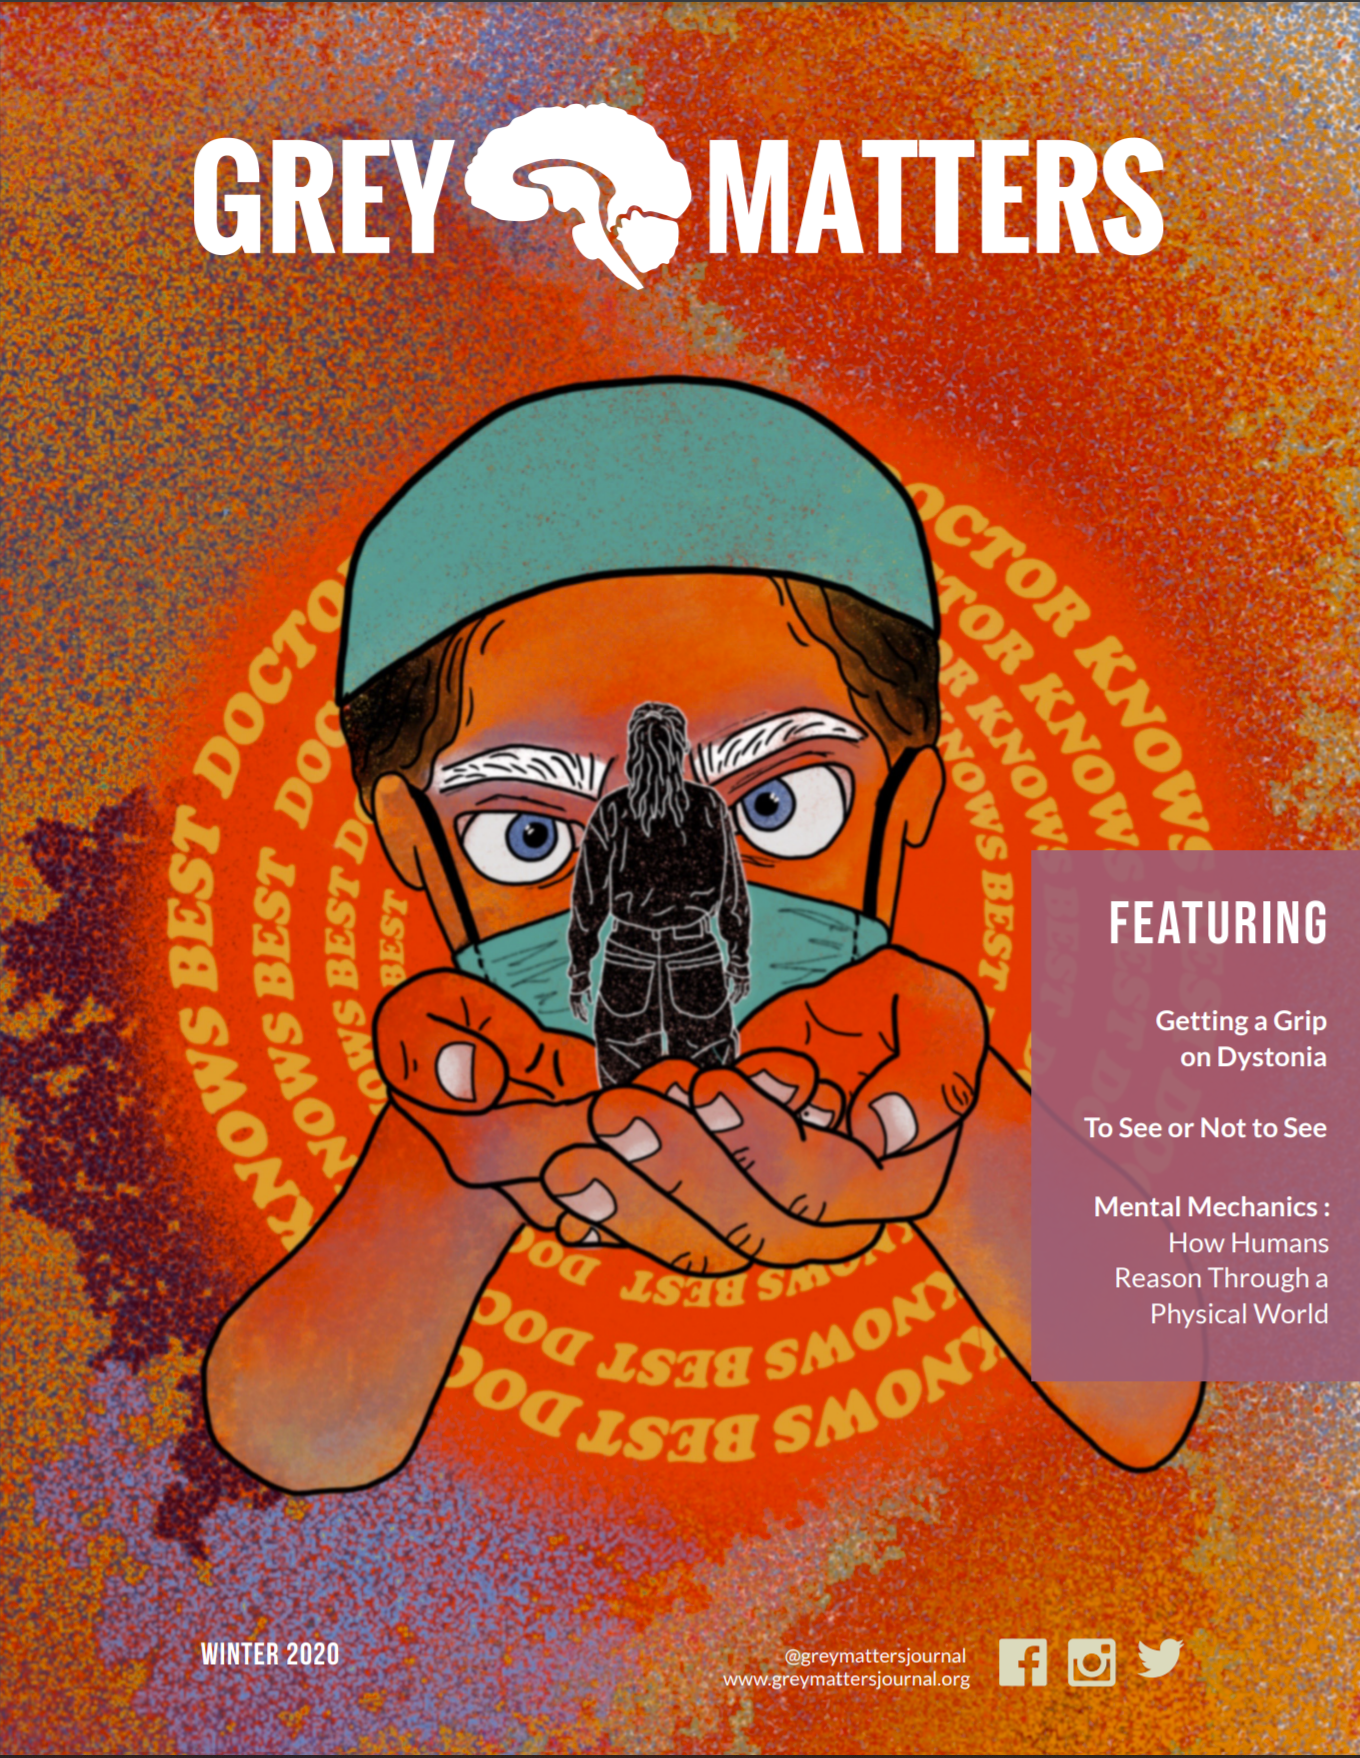 Grey Matters Journal Issue 19